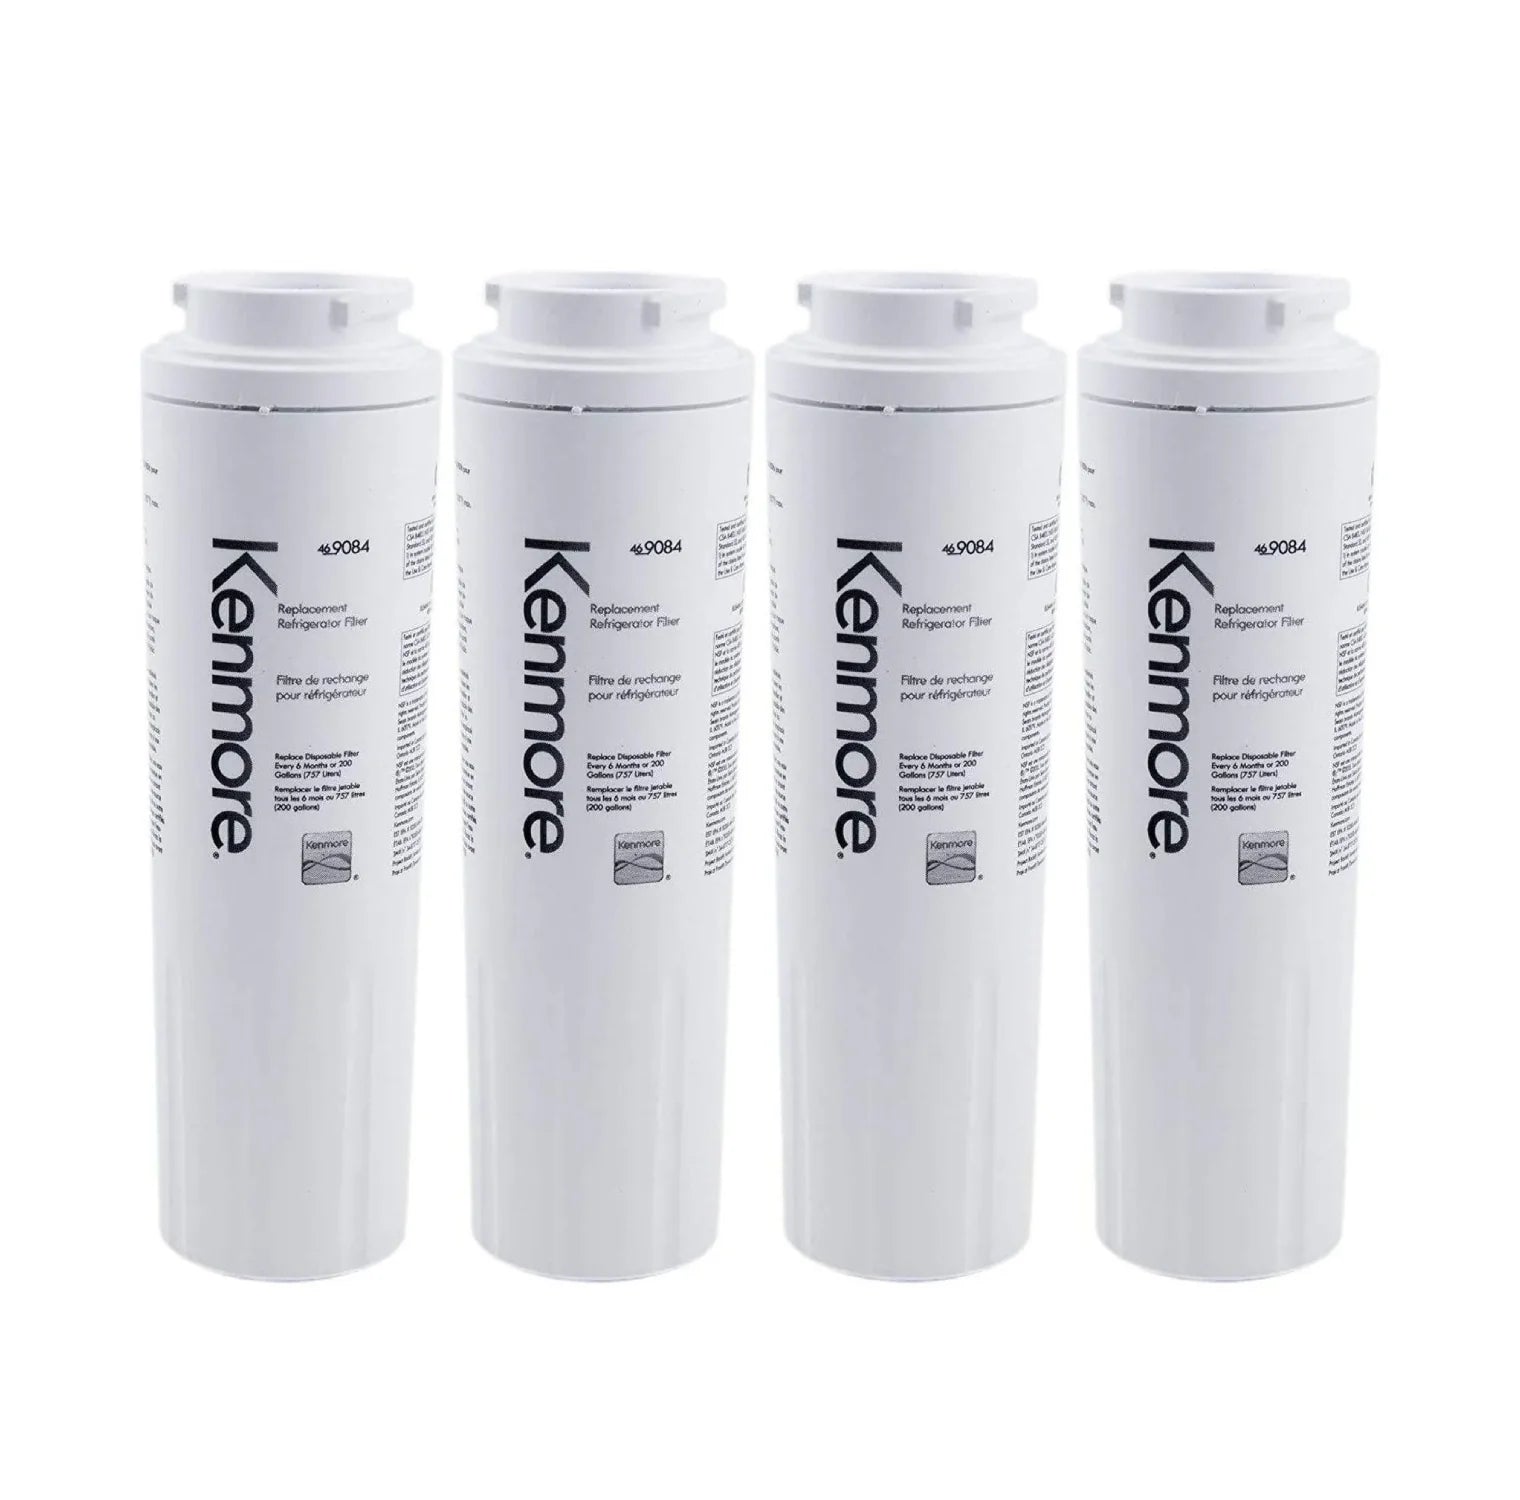 Kenmore 9084, 46-9084 Replacement Refrigerator Water Filter, 4 pack